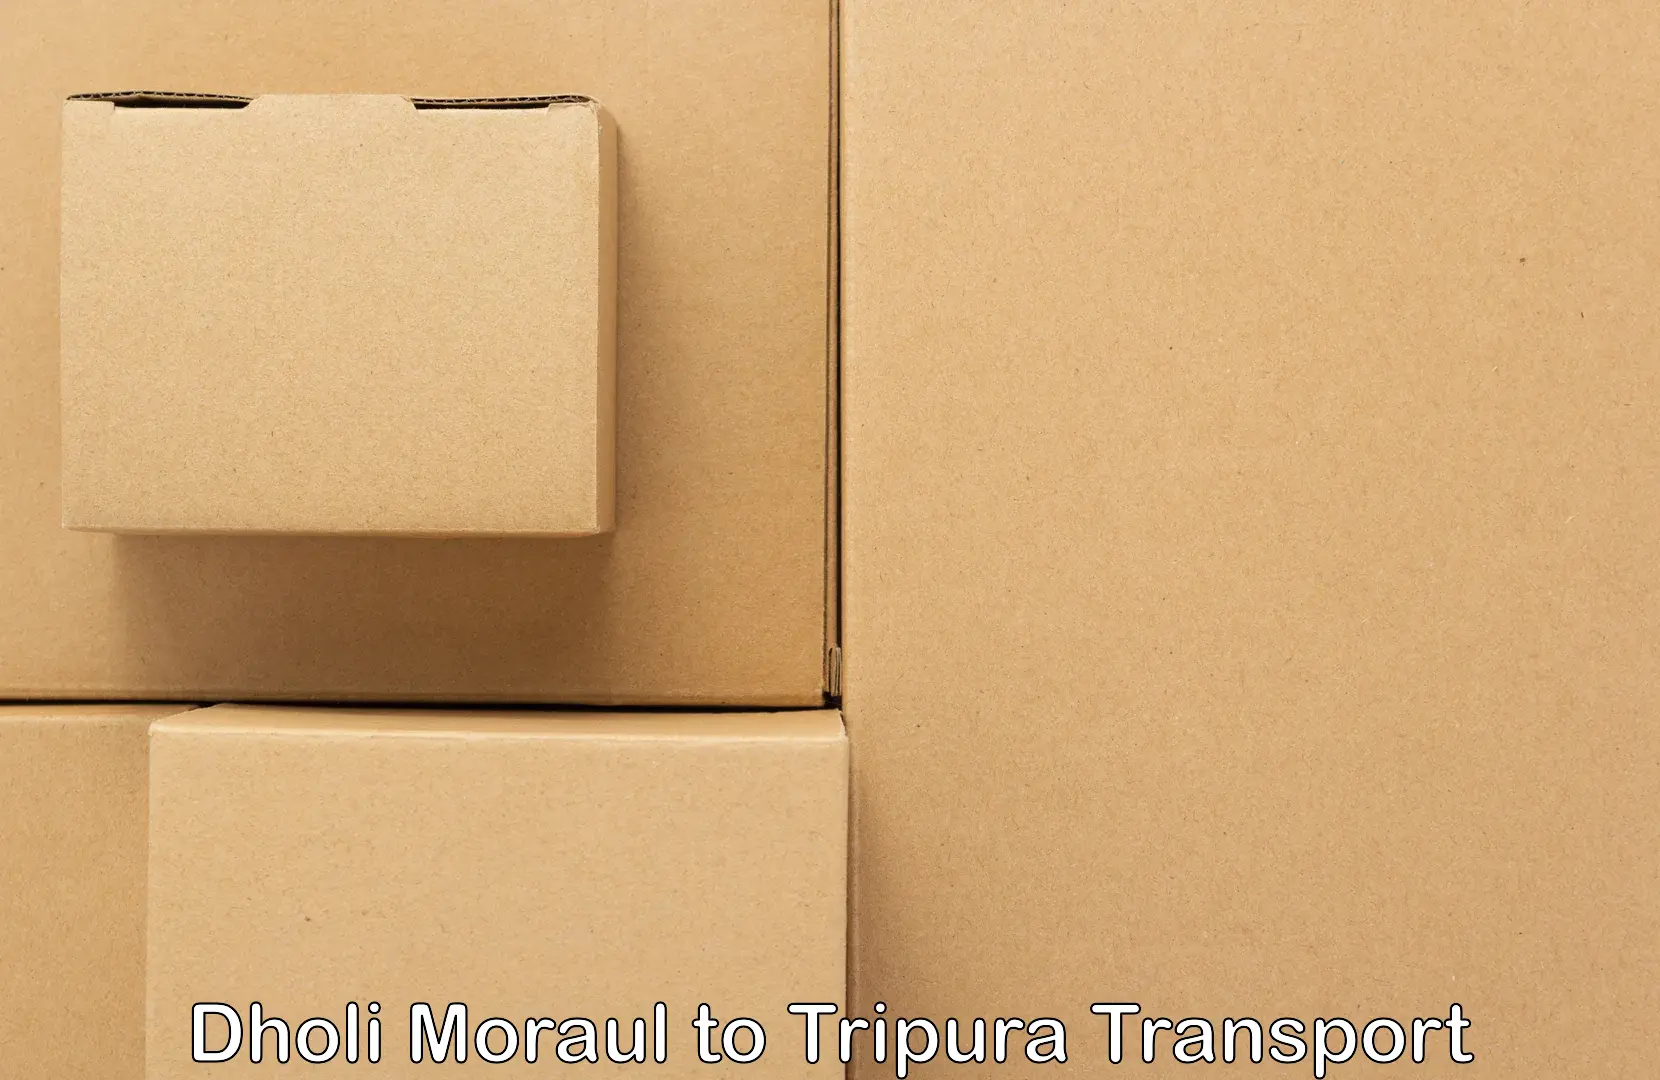 Container transportation services Dholi Moraul to Udaipur Tripura